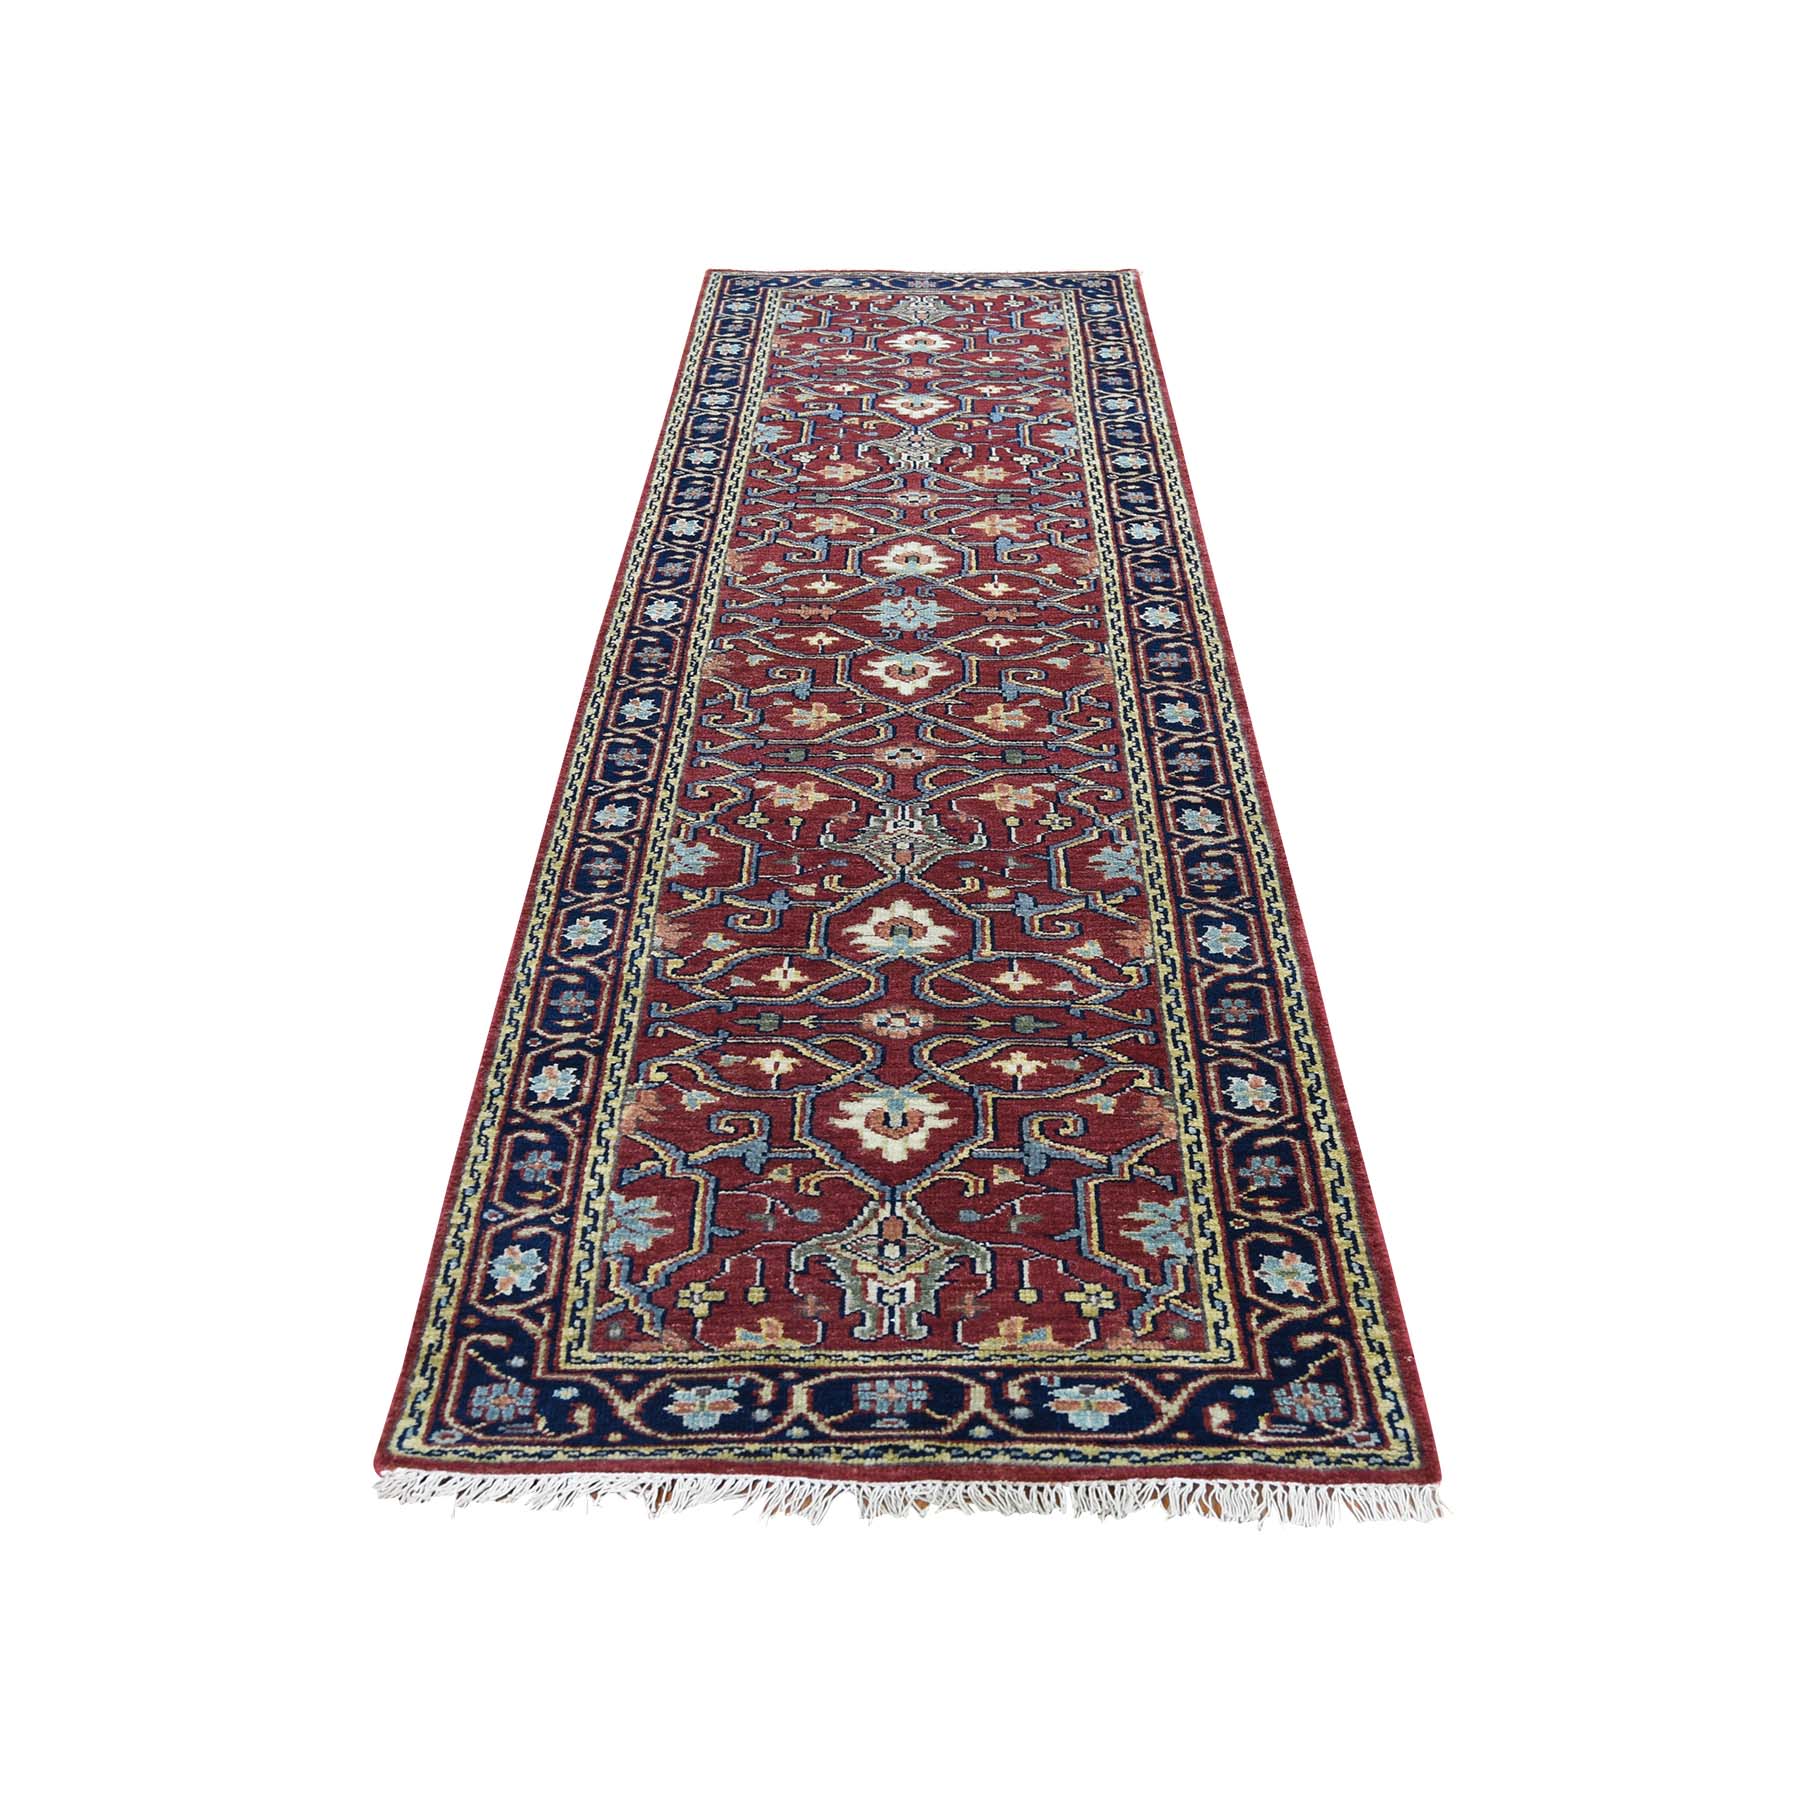 2'7"X9'8" Red Heriz Revival Pure Wool Hand-Knotted Oriental Runner Rug moad6699